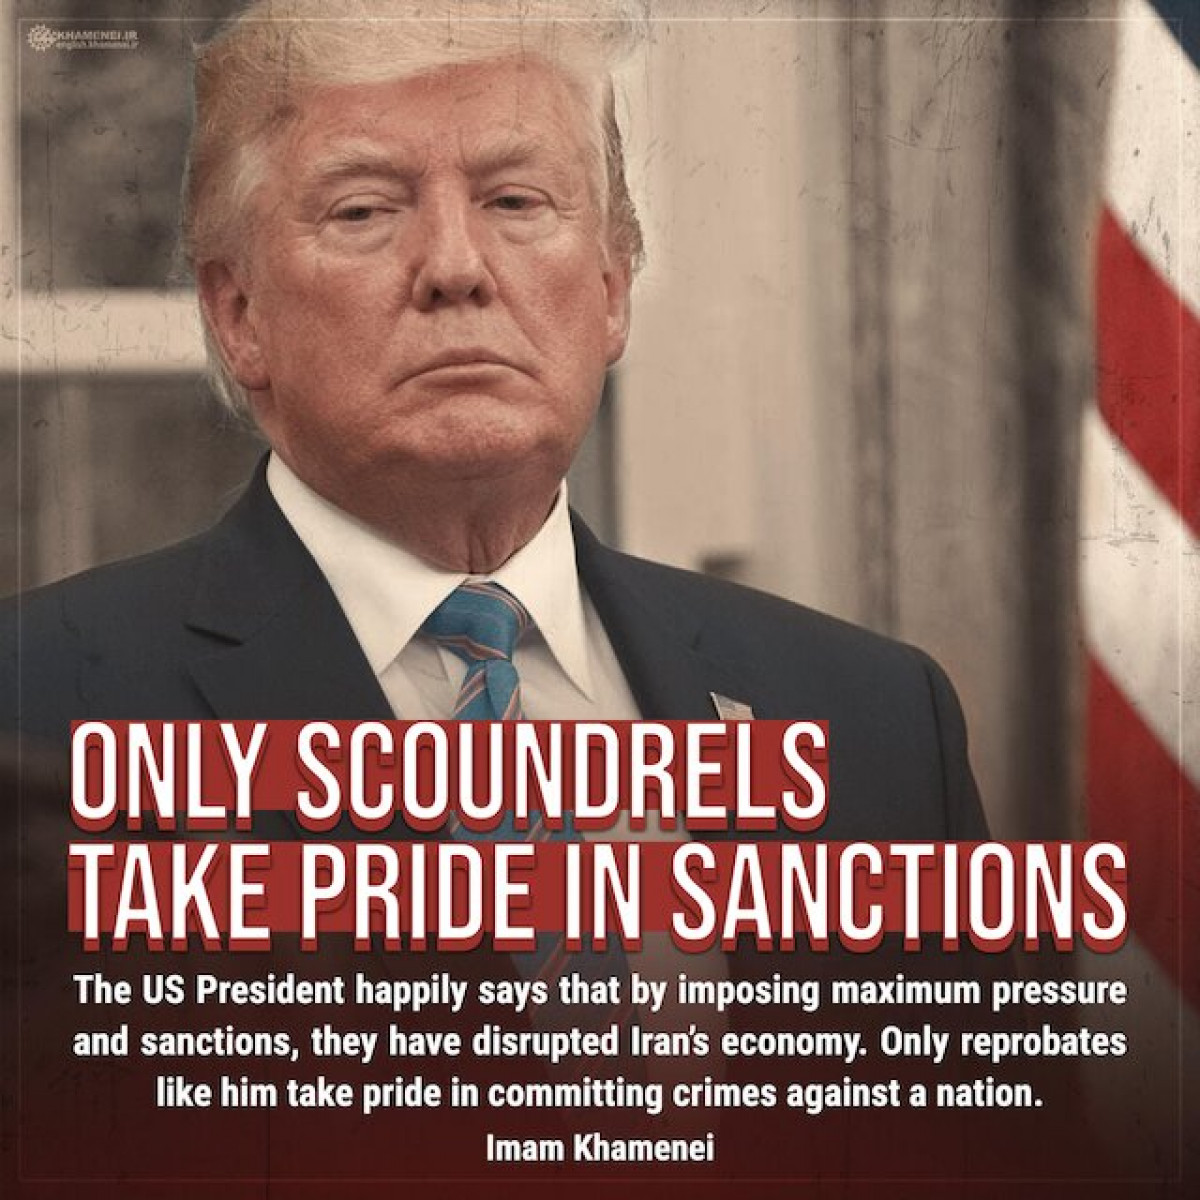 Only scoundrels take pride in sanctions